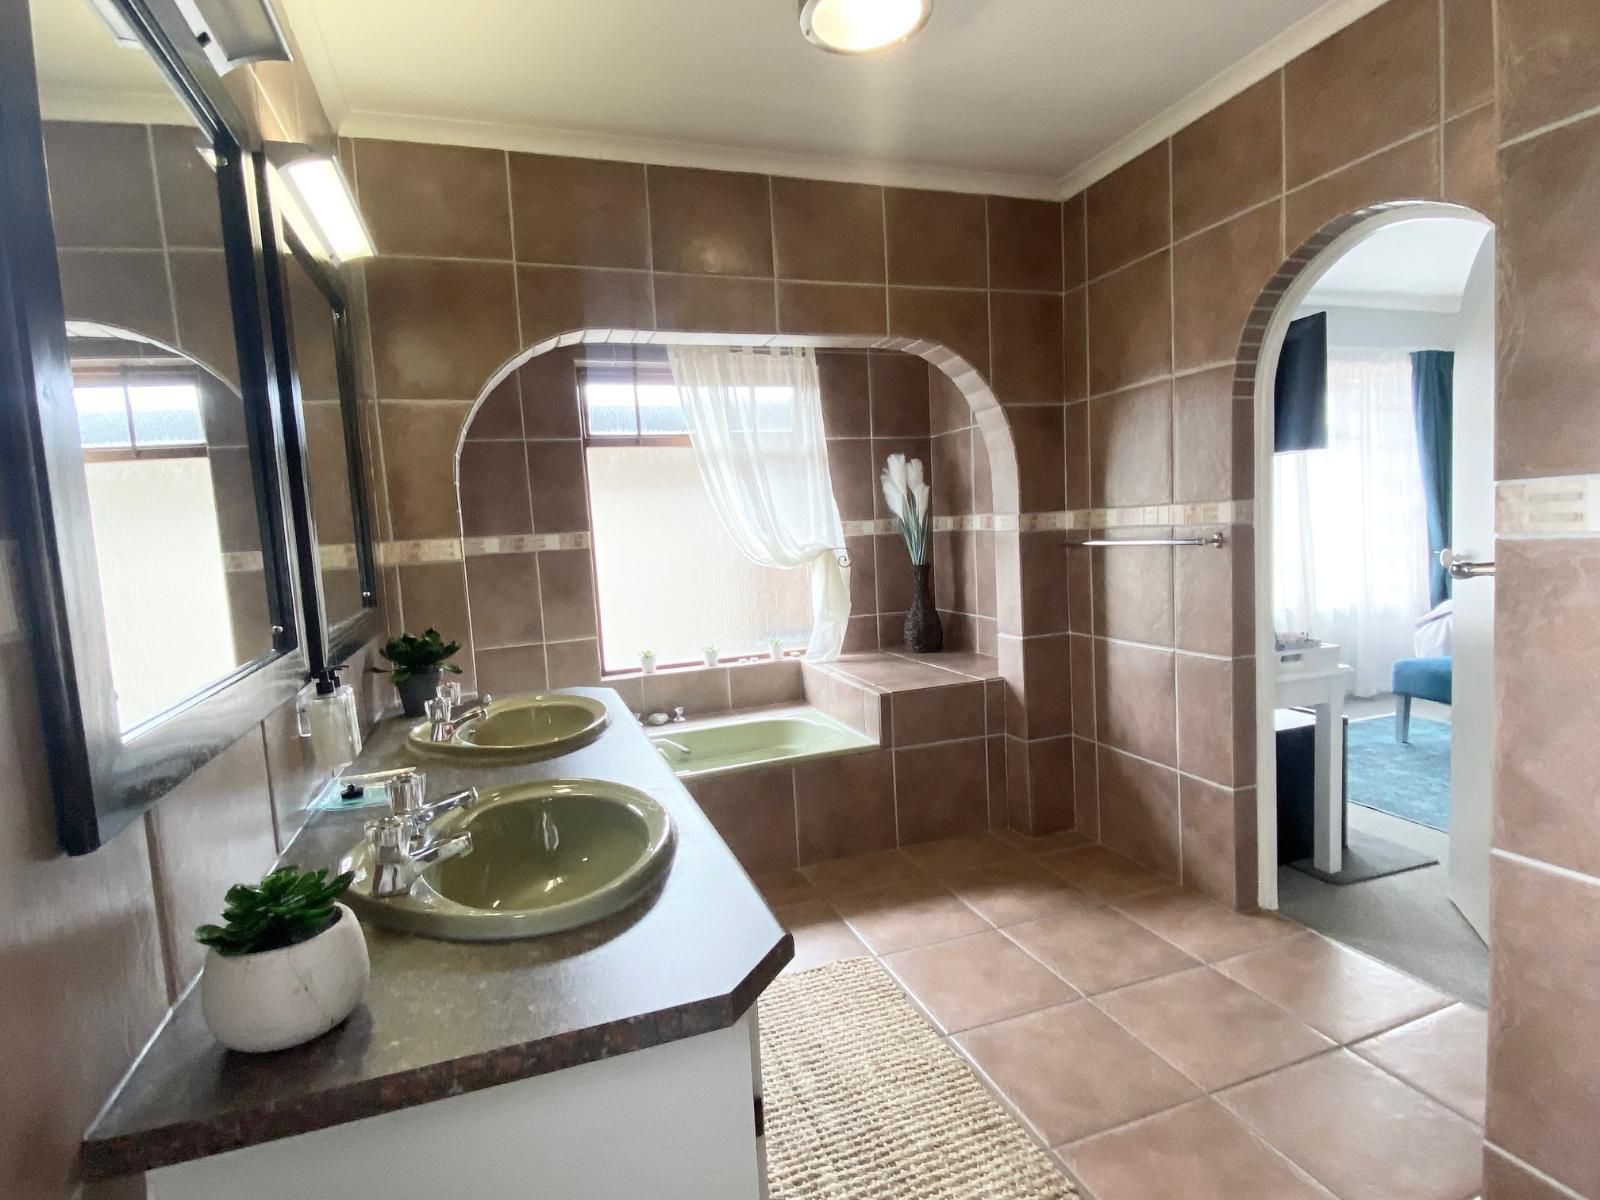 Dolphin Circle Bed And Breakfast Plett Central Plettenberg Bay Western Cape South Africa Bathroom